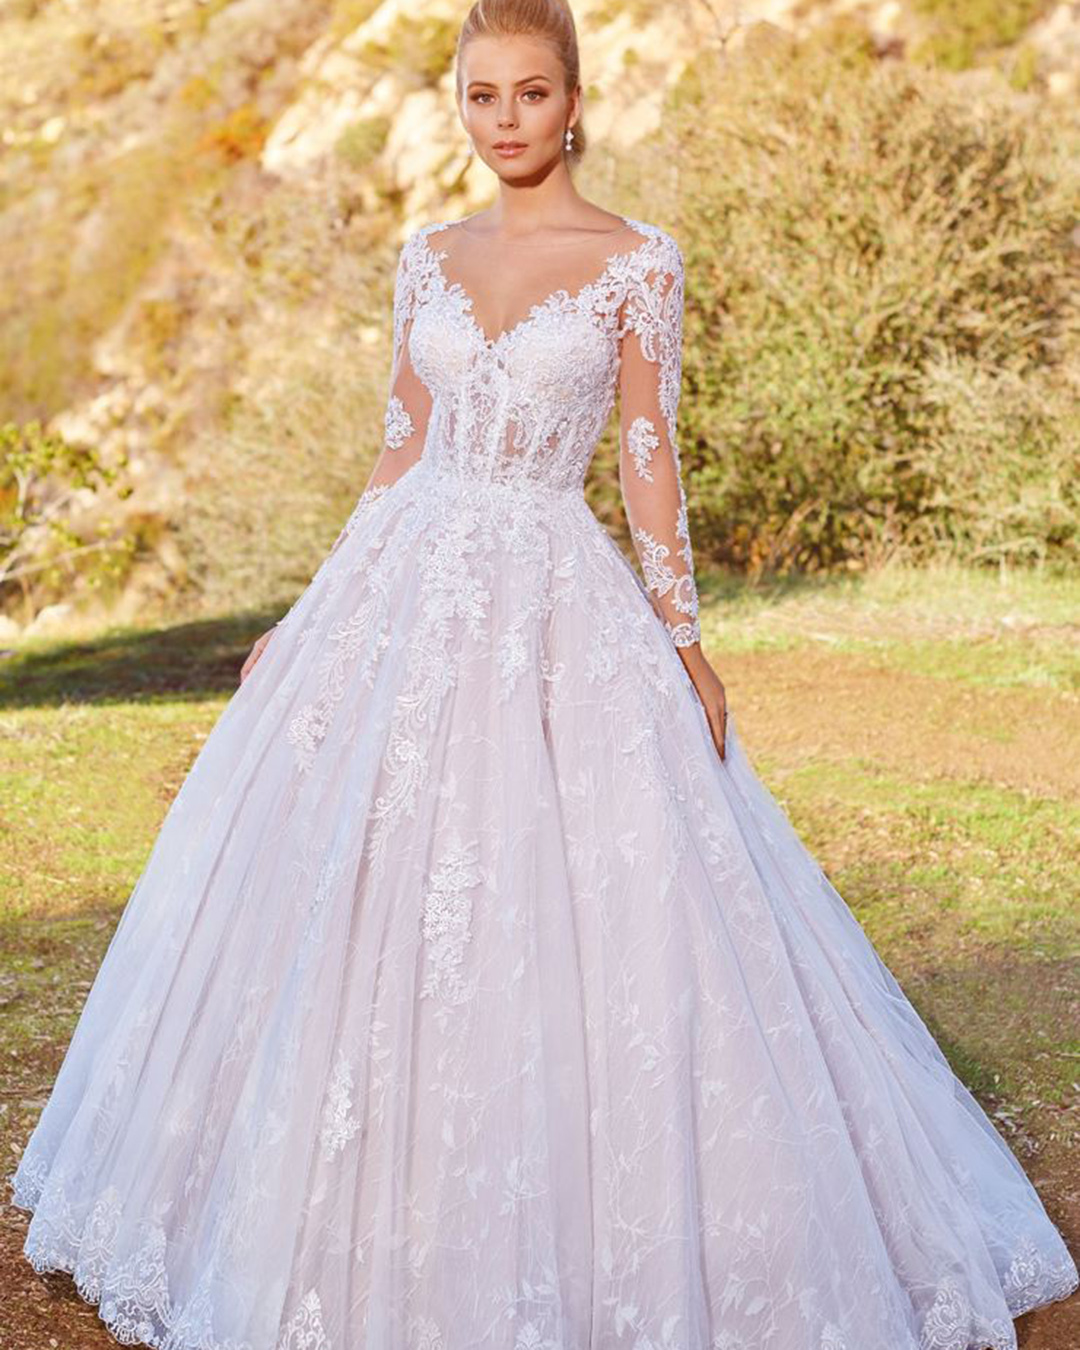 fashion forward wedding dresses ball gown with long sleeves lace sweetheart neckline martinthornburg